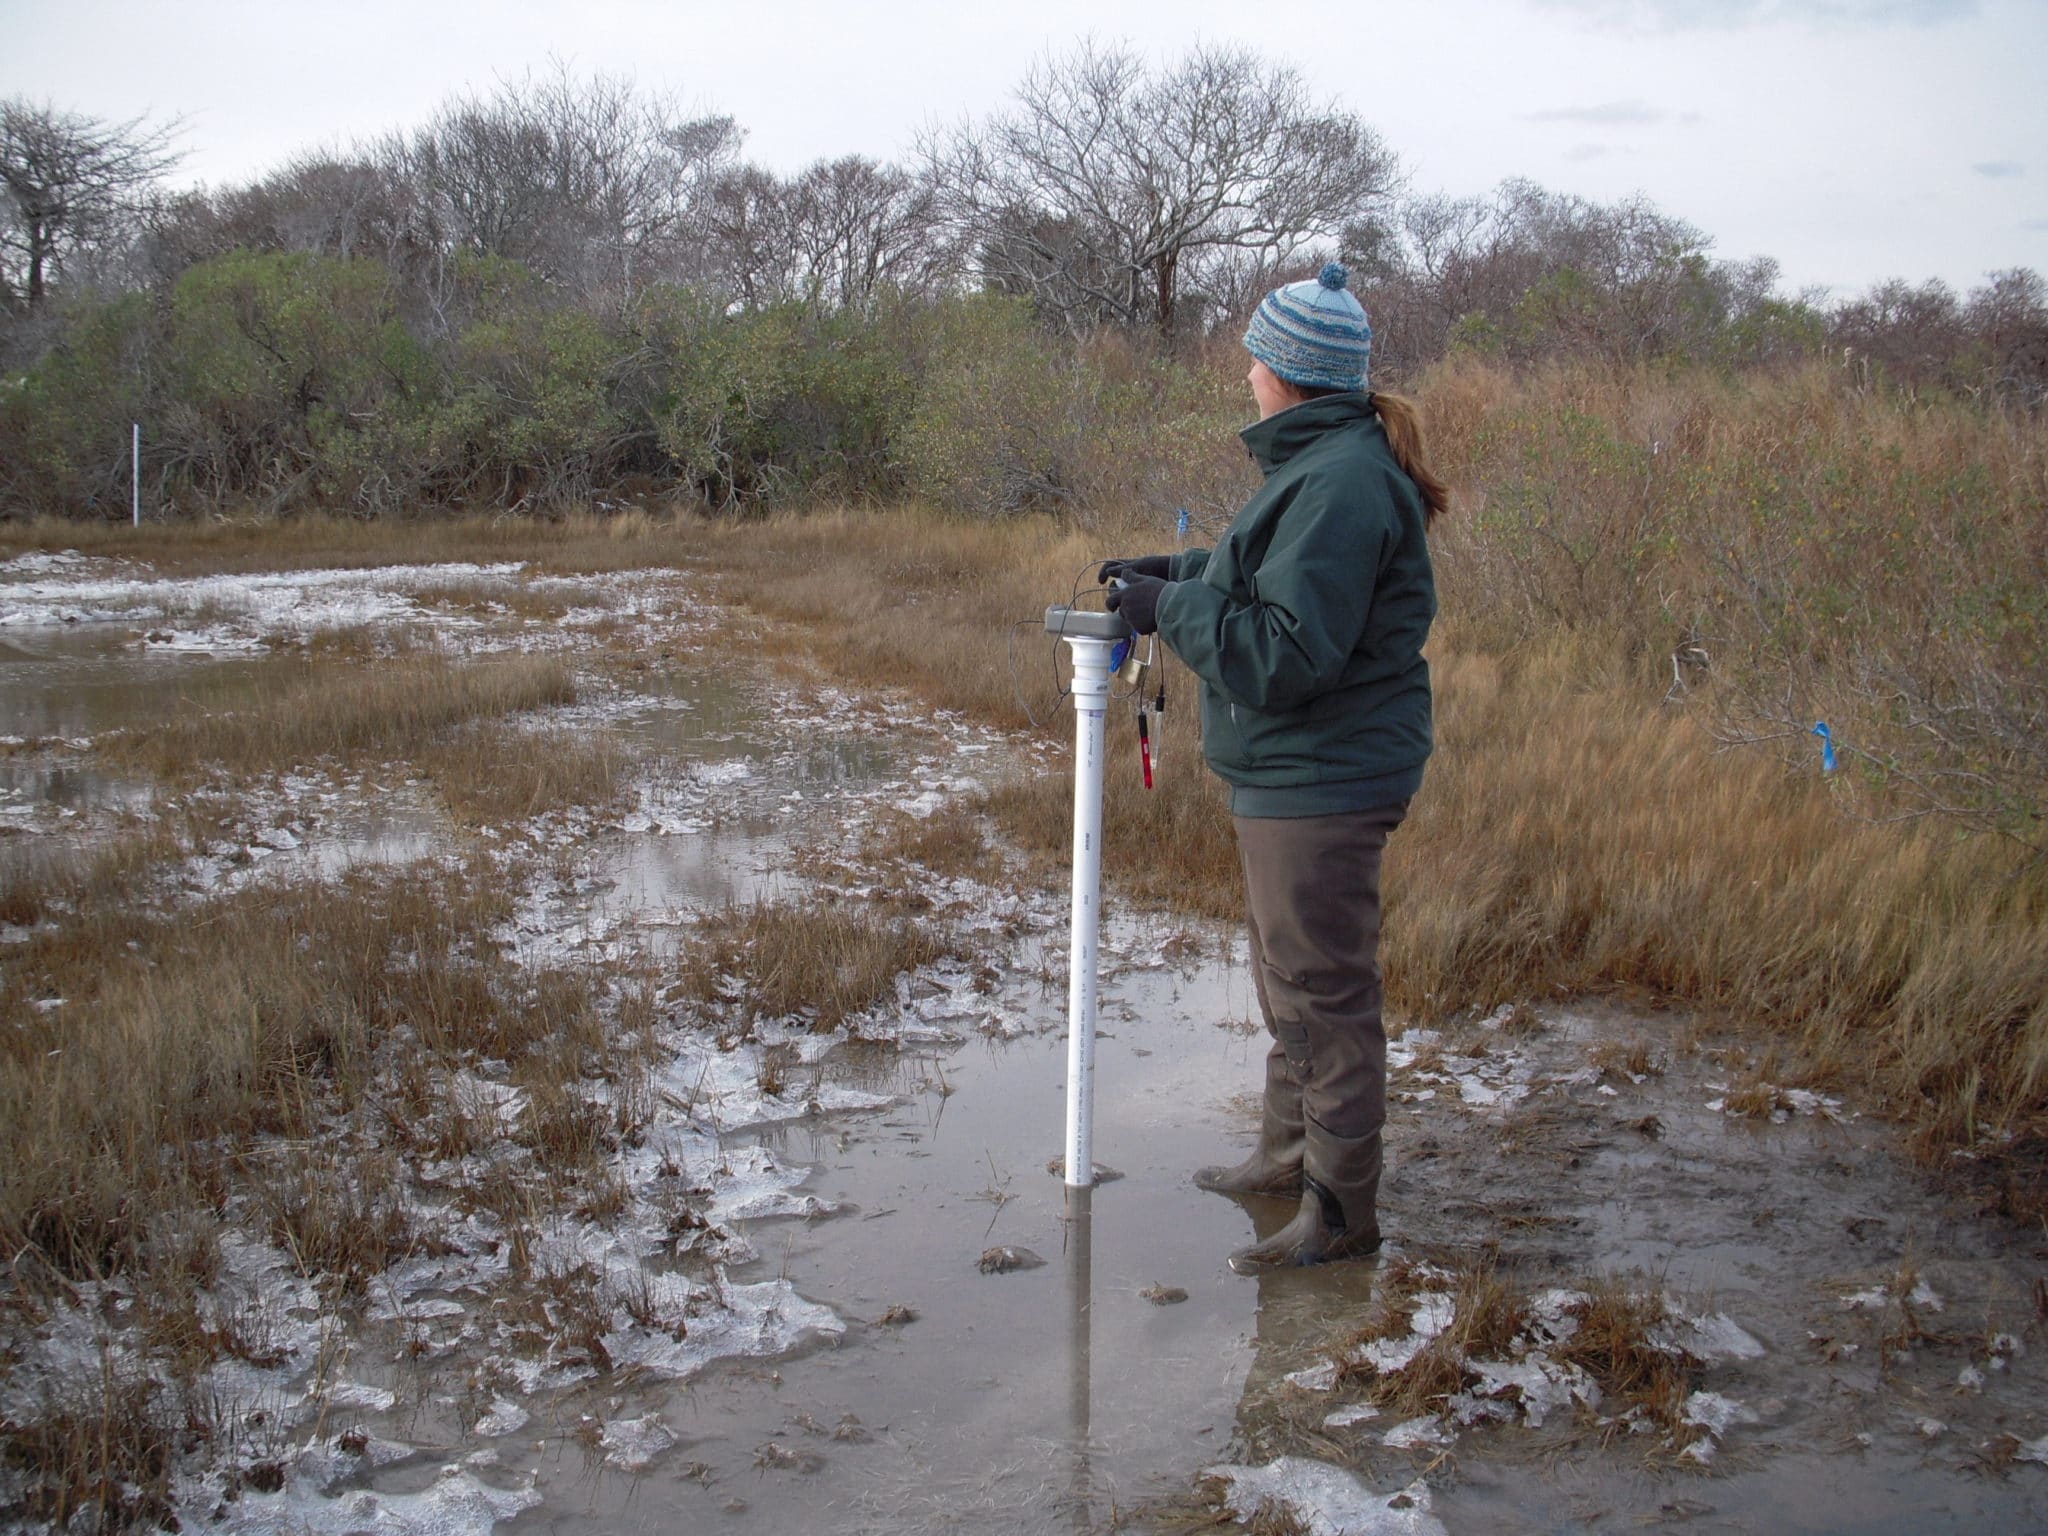 Measure tide water levels during winter storms in a salt marsh